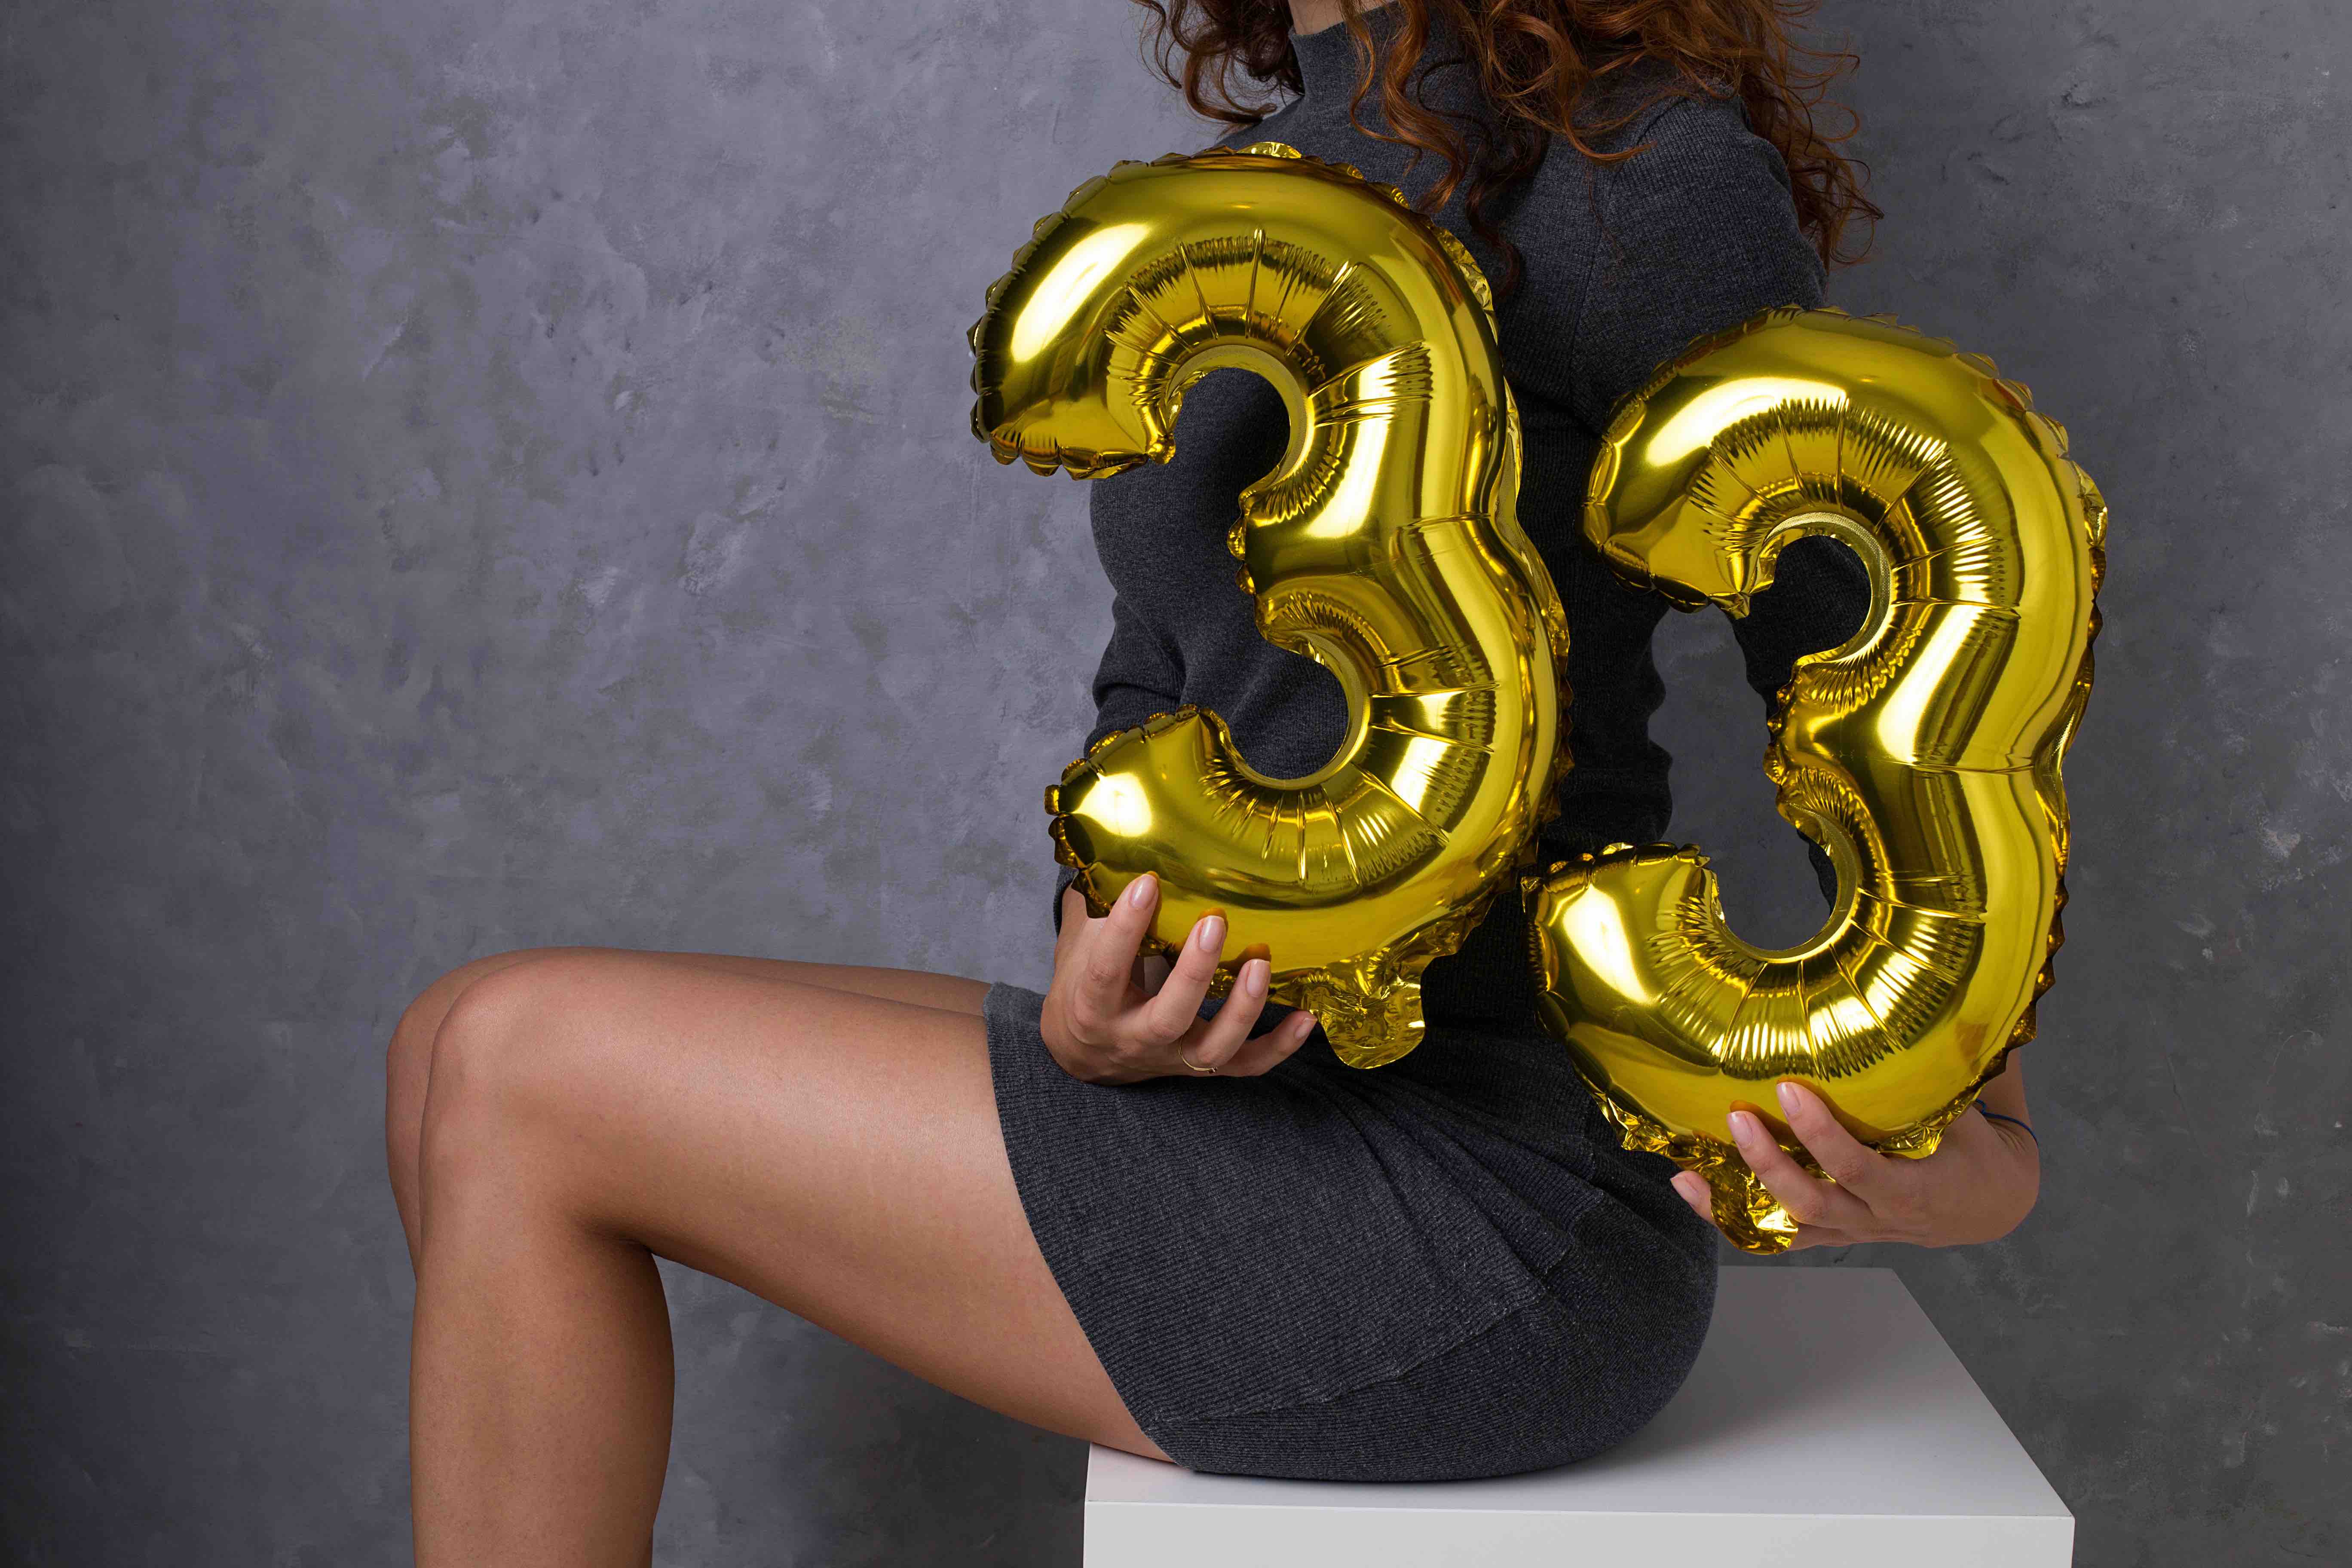 18 Facts About Being 33 Years Old - Facts.net